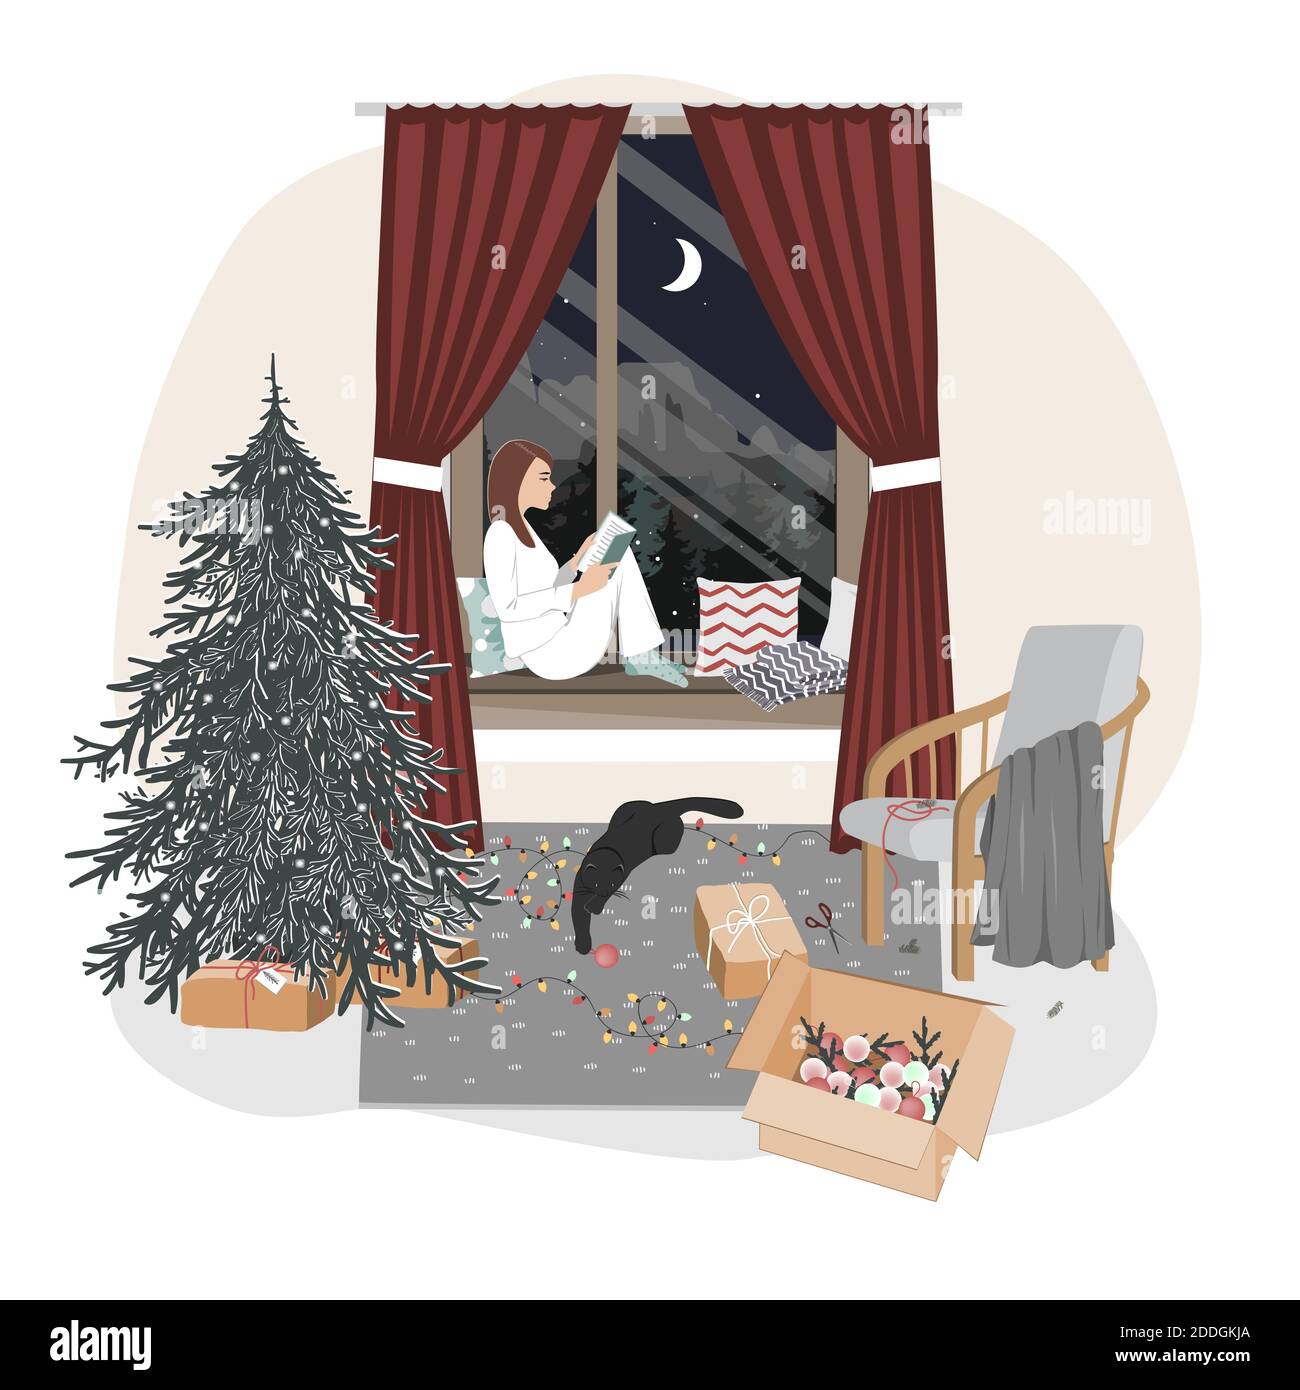 A cute relaxed girl sitting on a windowsill and reading. Hygge xmas mood with new year tree, playing cat, and winter window landscape. Christmas Stock Vector